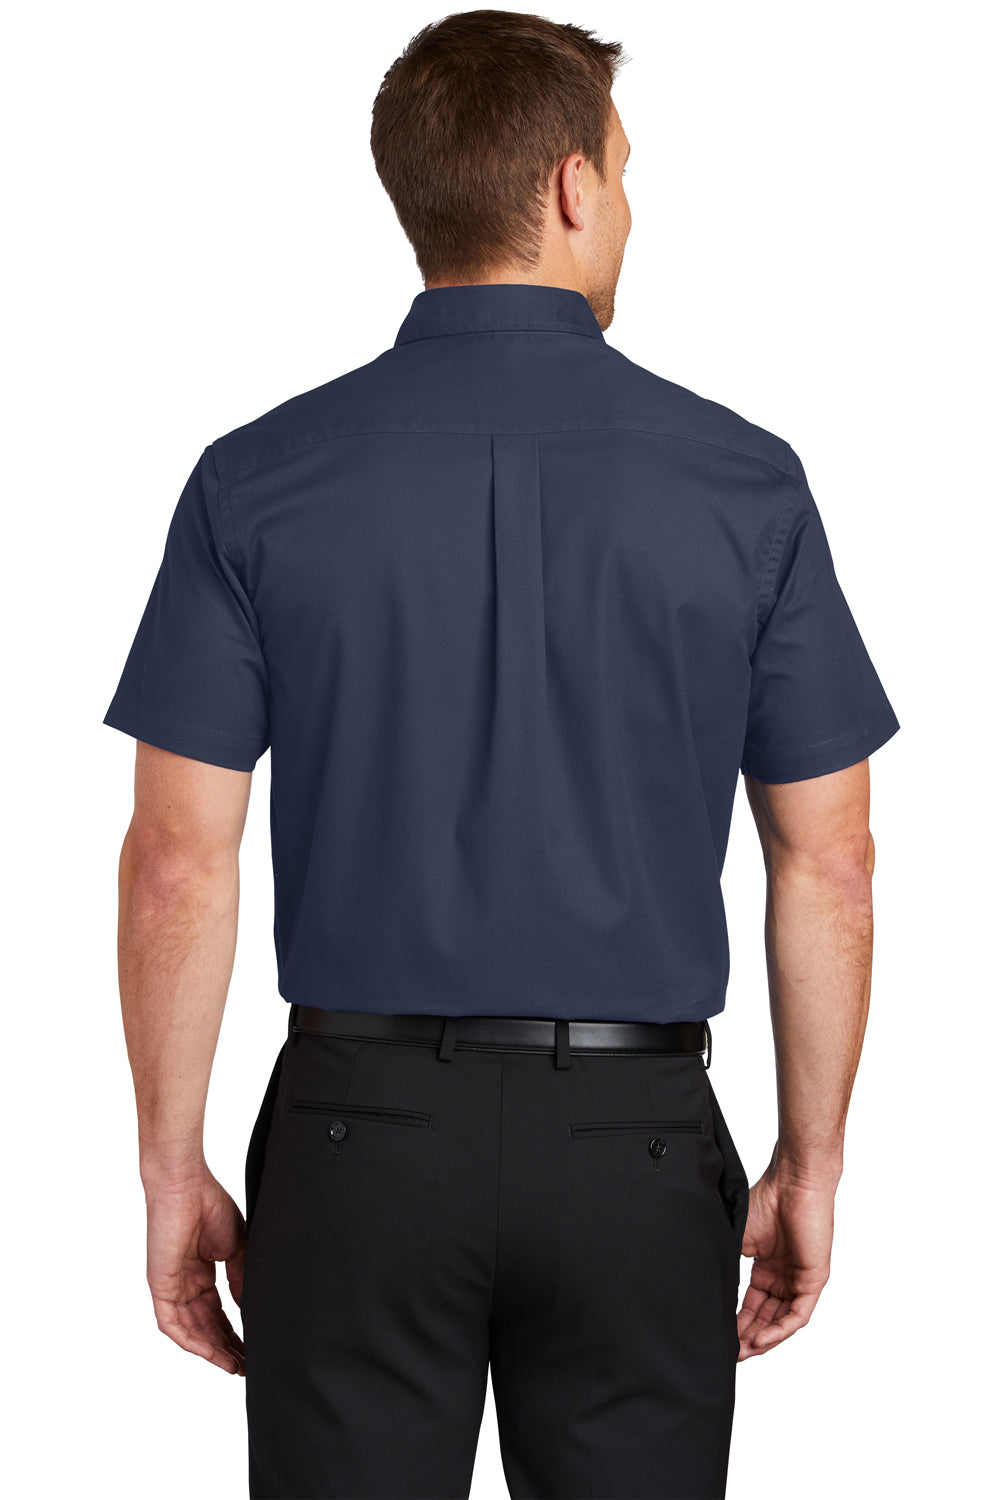 Port Authority S508/TLS508 Mens Easy Care Wrinkle Resistant Short Sleeve Button Down Shirt w/ Pocket Navy Blue Back